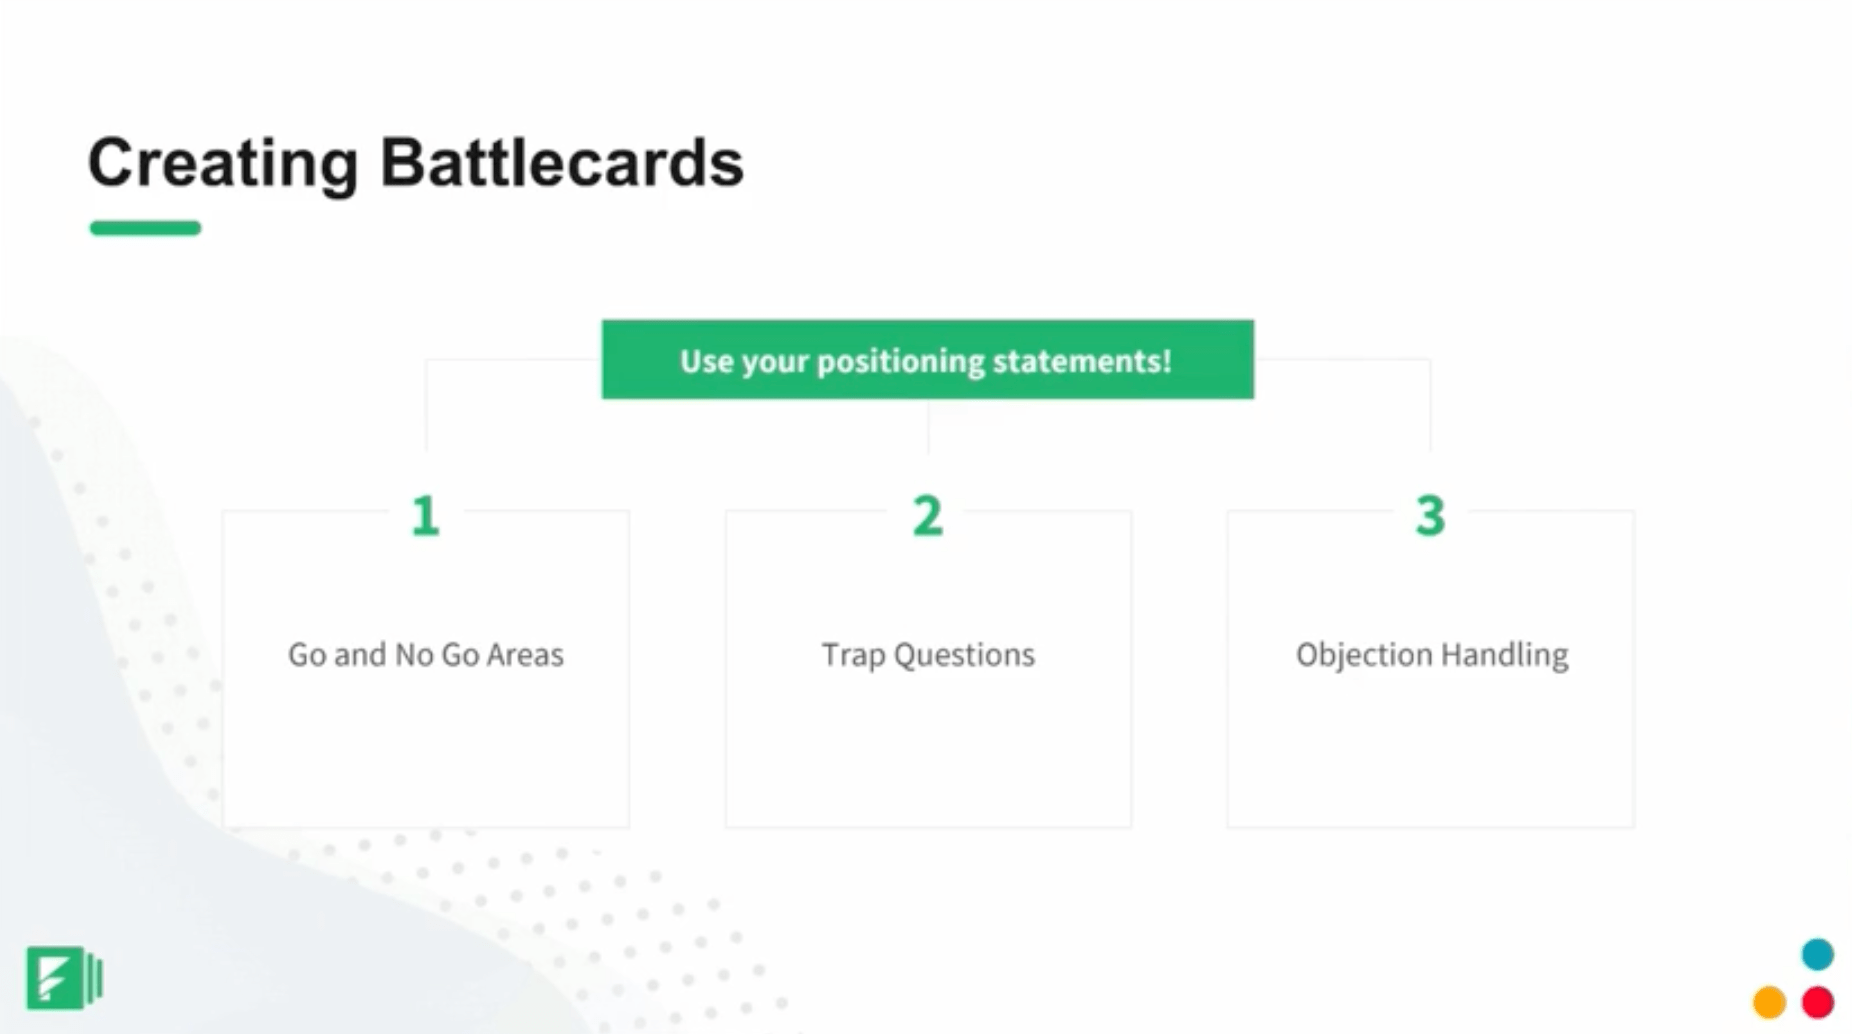 Use the positioning statements you have to create your battlecards.